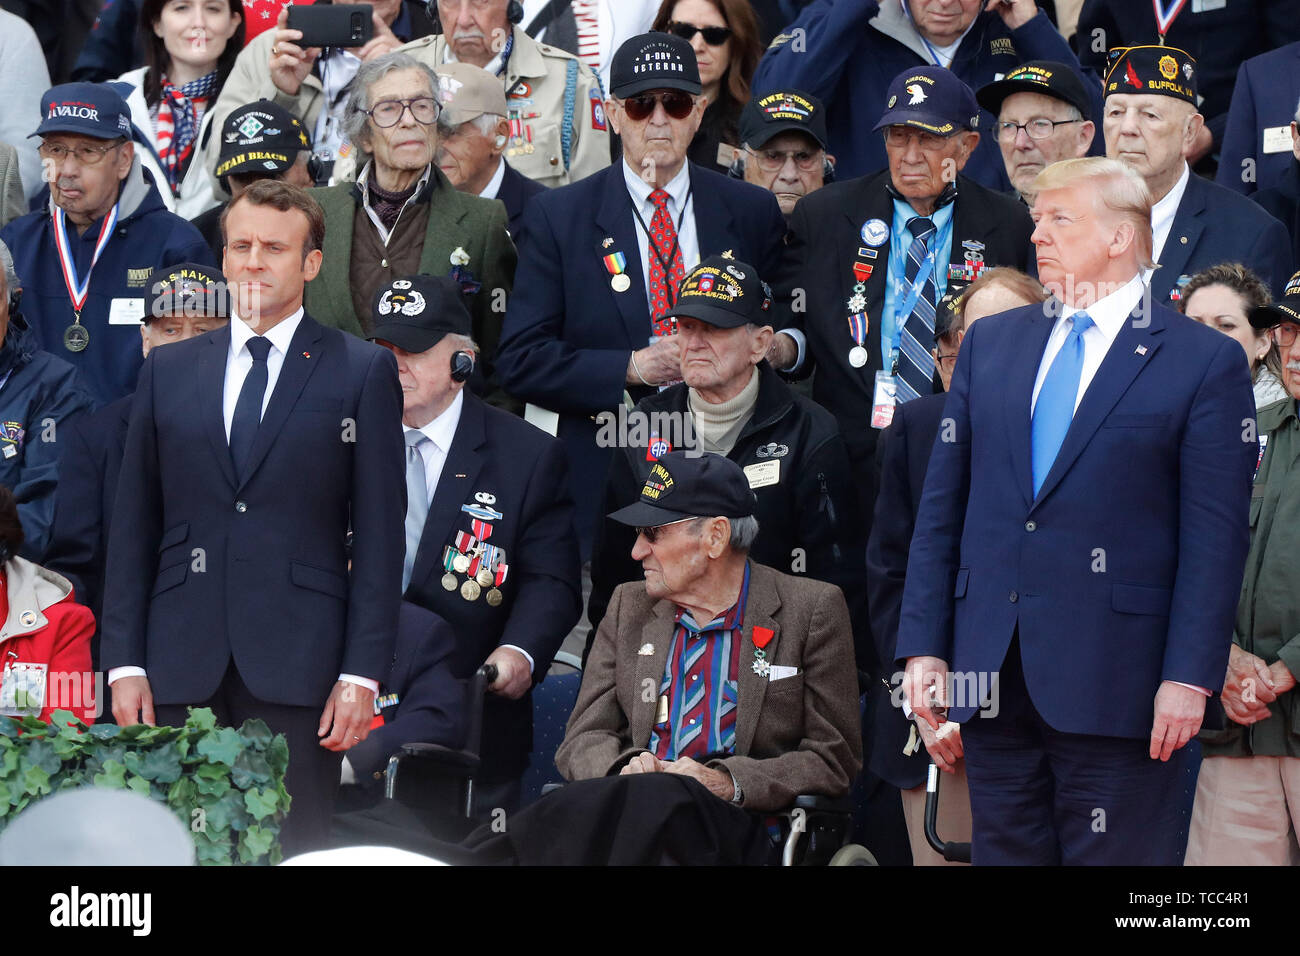 Normandy, France. 6th June, 2019. President Emmanuel Macron (L) and U.S. President Donald Trump (R) attend a ceremony to mark the 75th anniversary of the D-Day landings at the Normandy American Cemetery and Memorial in Colleville-sur-Mer, Normandy, France, June 6, 2019. A commemoration was held on Thursday in Normandy, north France, to mark the 75th anniversary of the D-Day landings against Nazi forces in World War II. Credit: Mao When/Xinhua/Alamy Live News Stock Photo